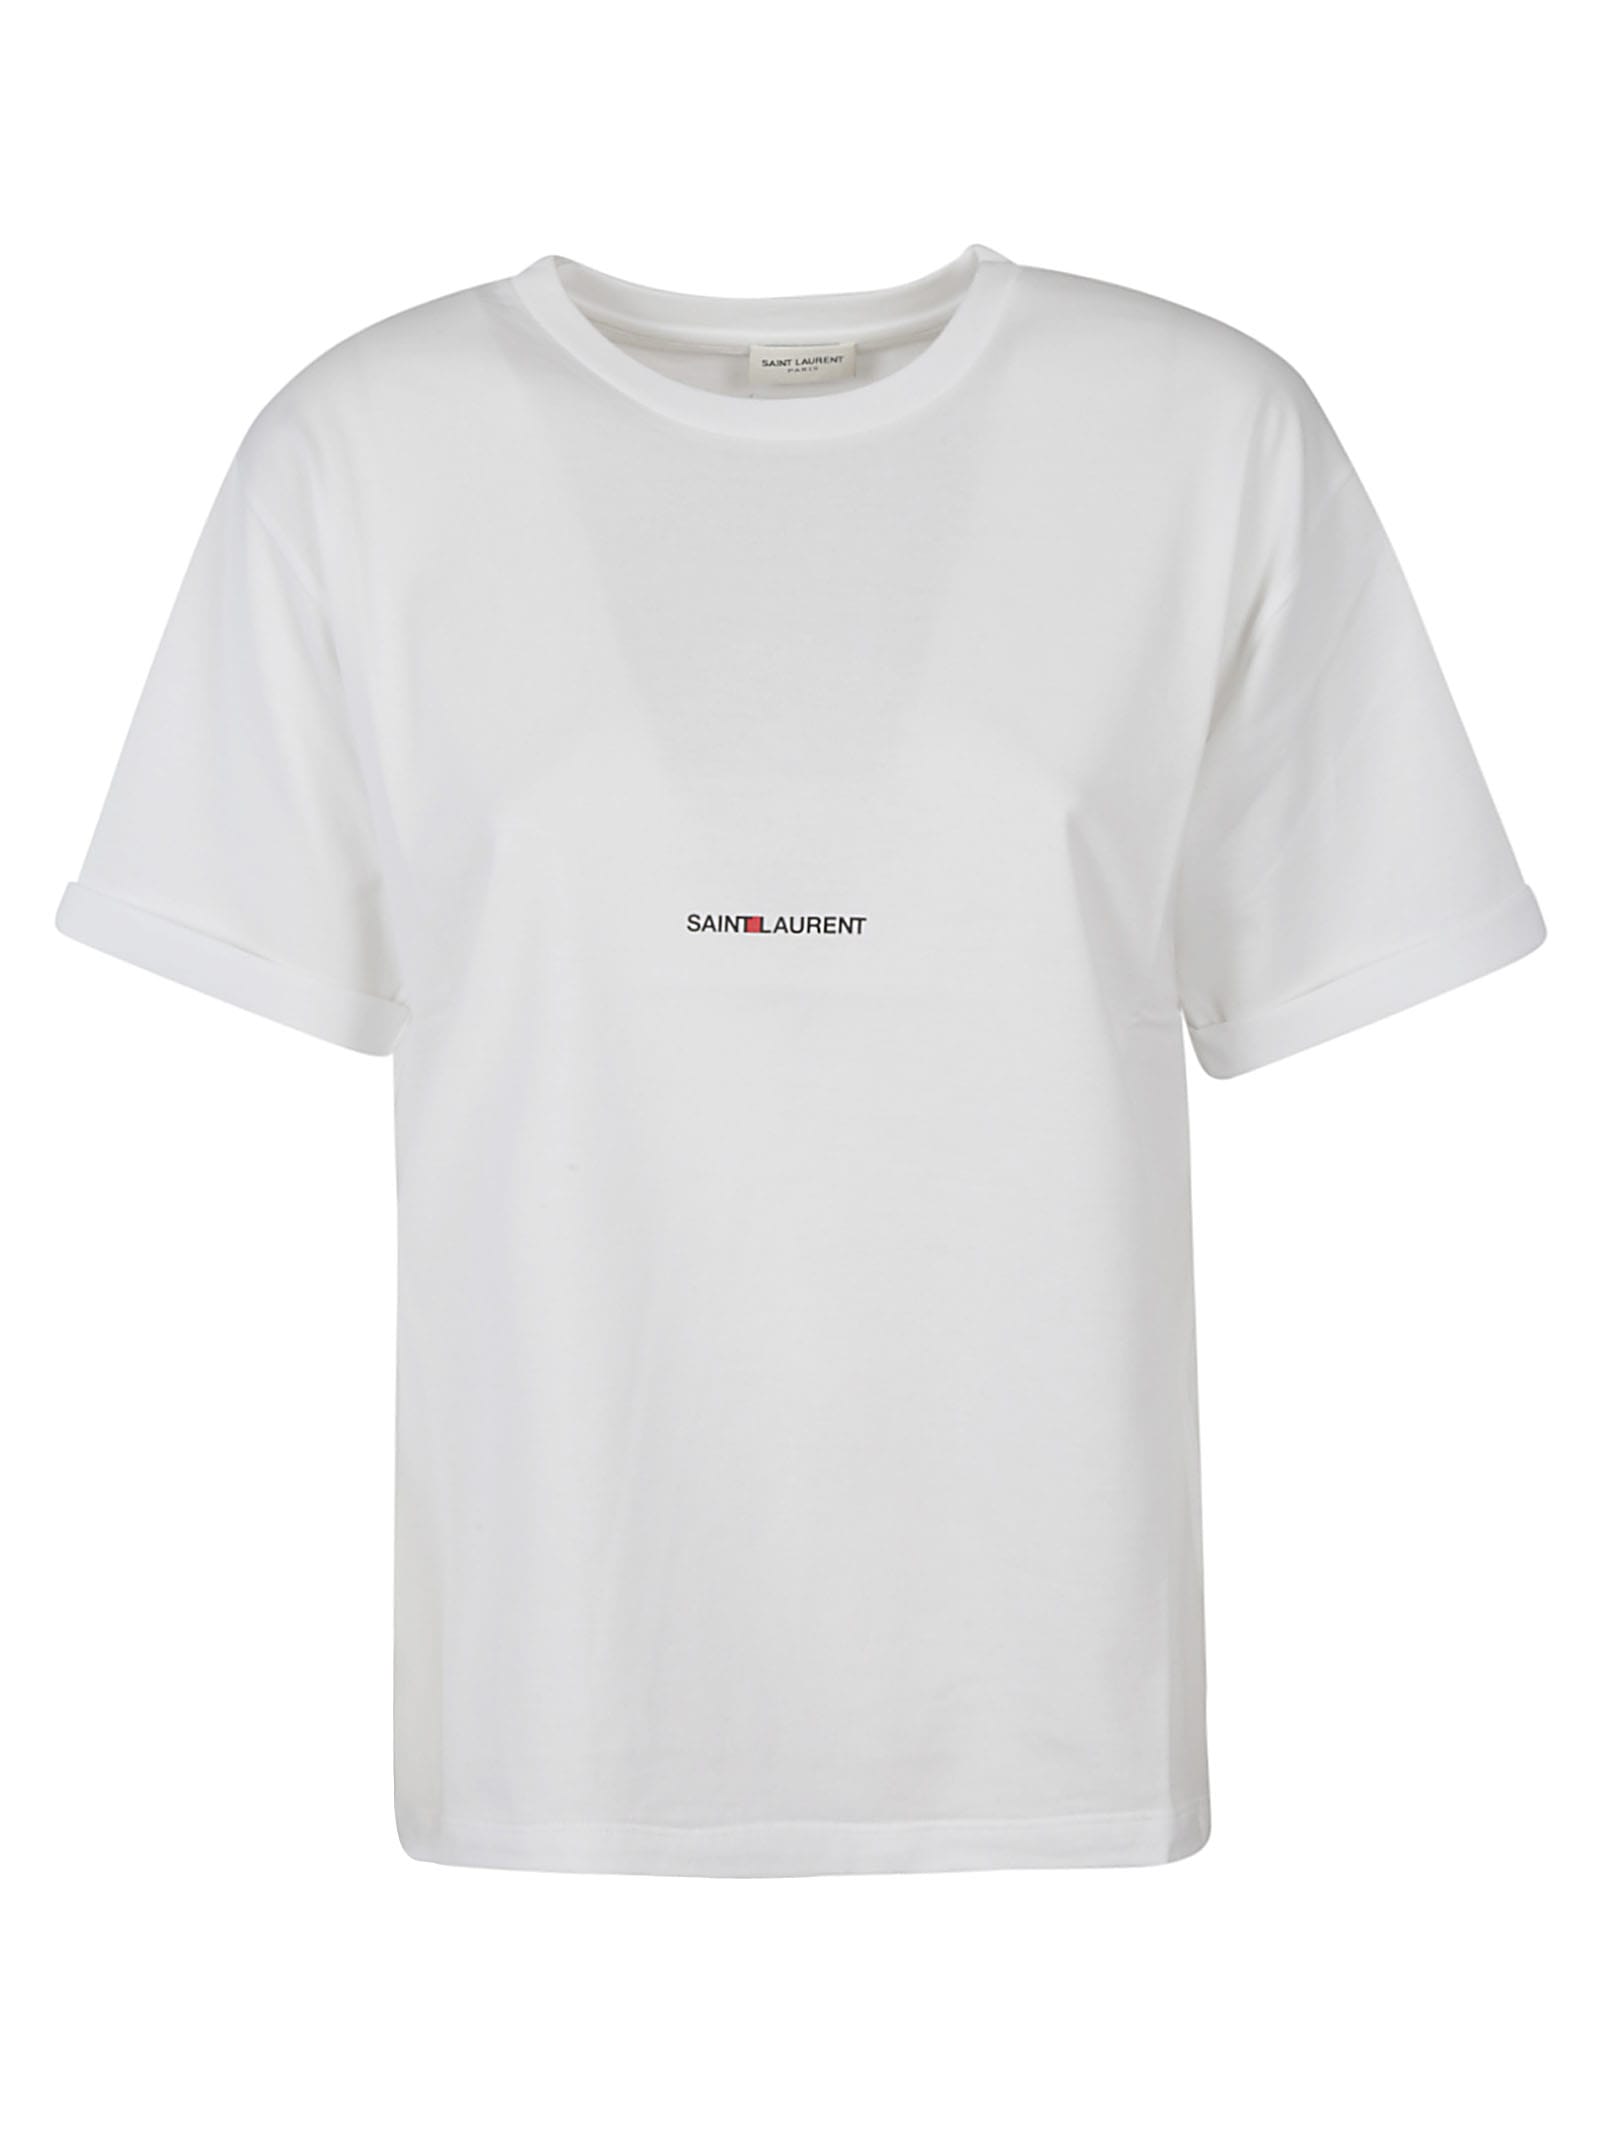 Saint Laurent Printed Cotton-jersey T-shirt In White | ModeSens